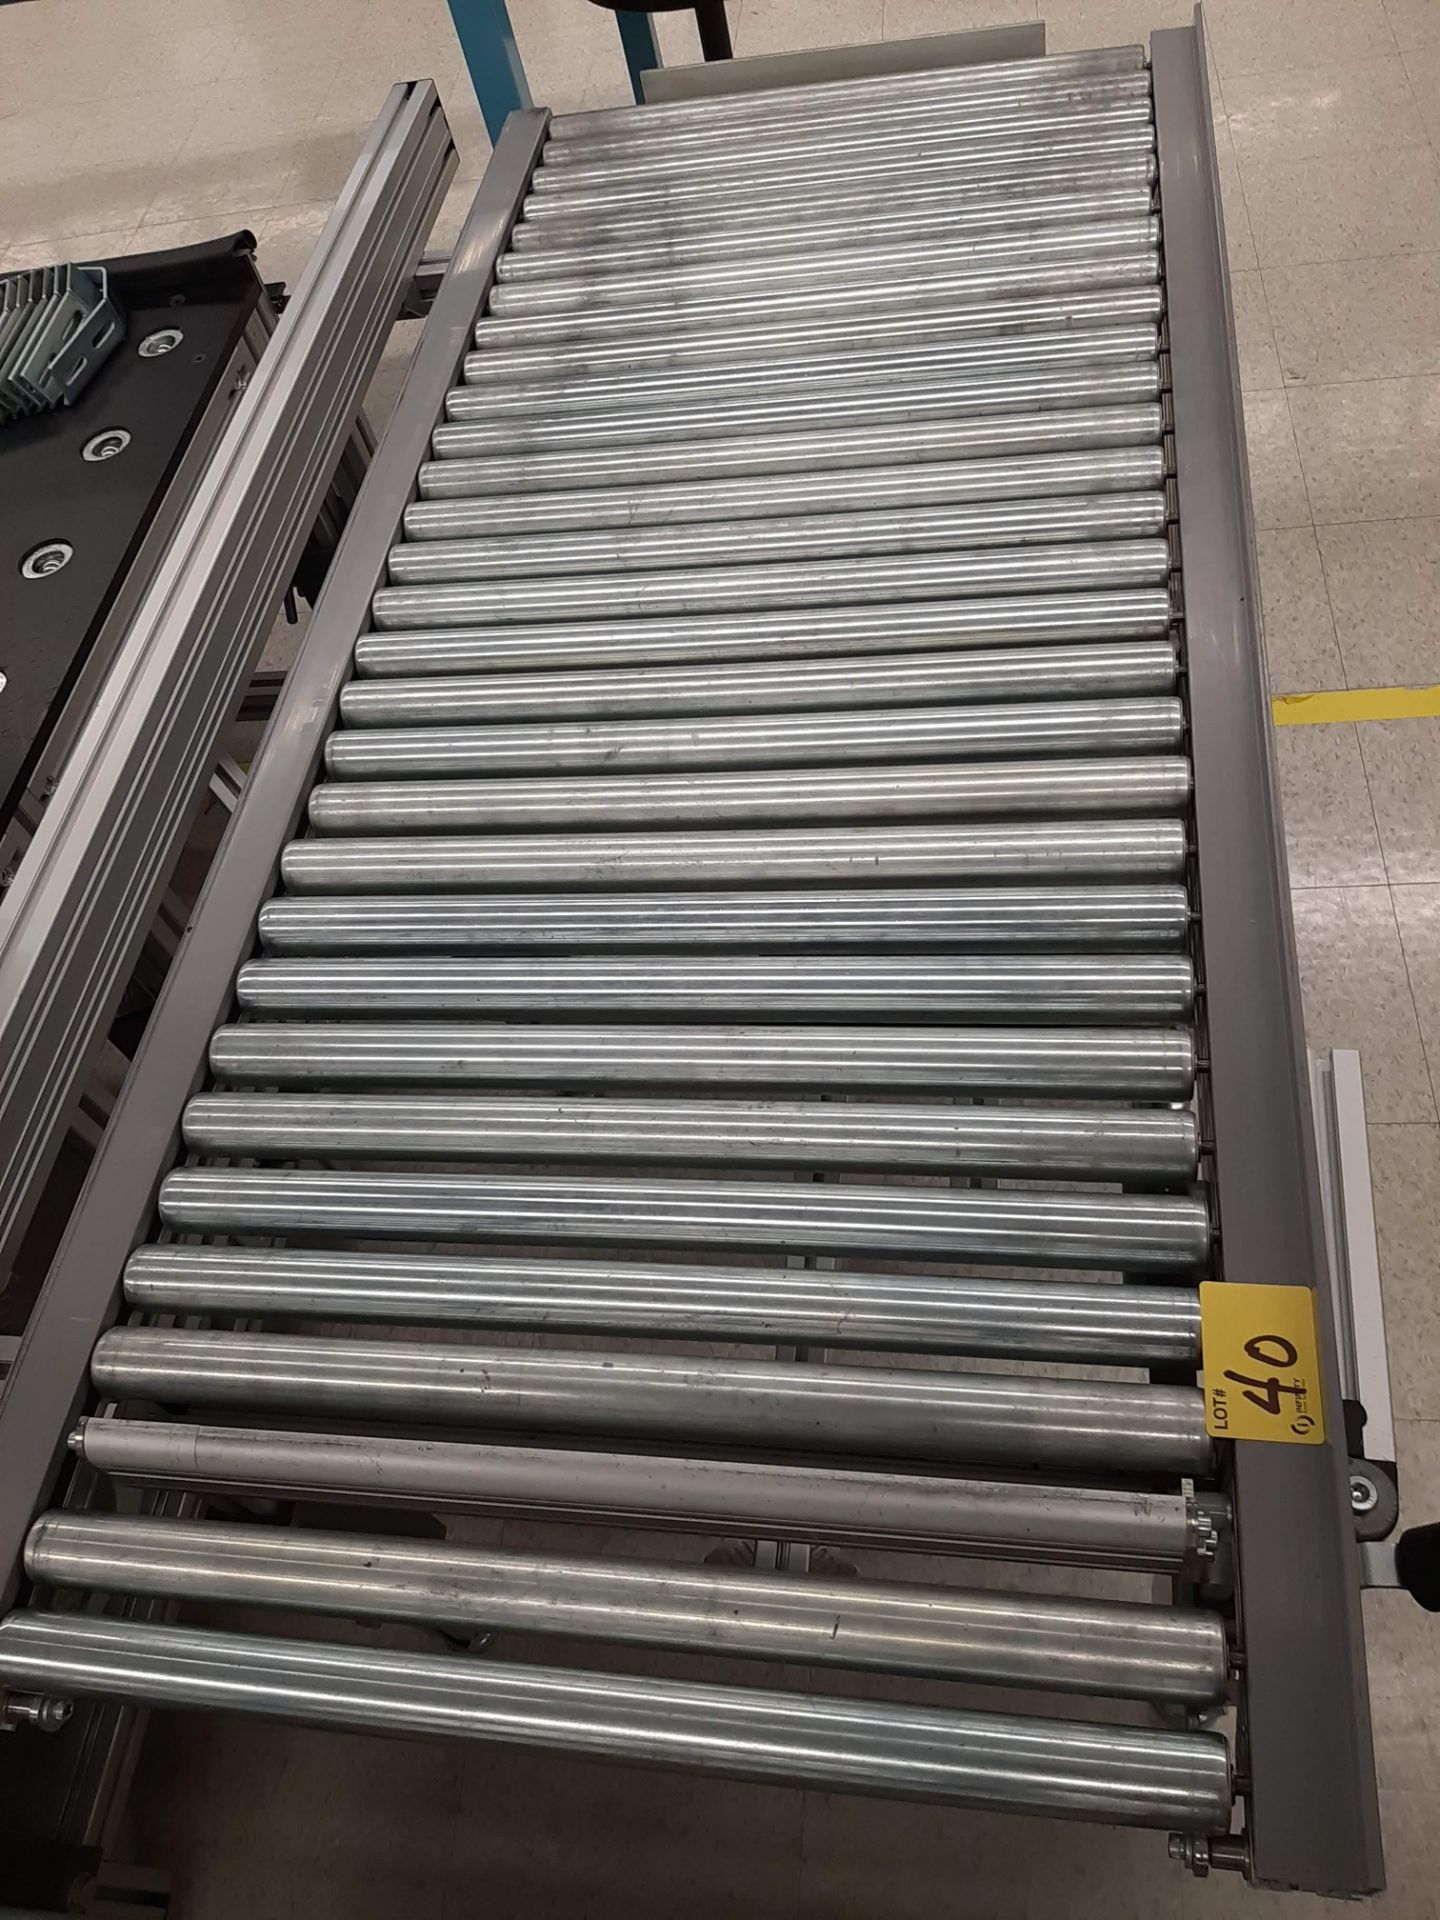 LOT - (4) PNEUMATIC ASSEMBLY/WORK TABLES W/ (4) SECTIONS 6' X 2' ROLLING CONVEYOR - Image 7 of 7